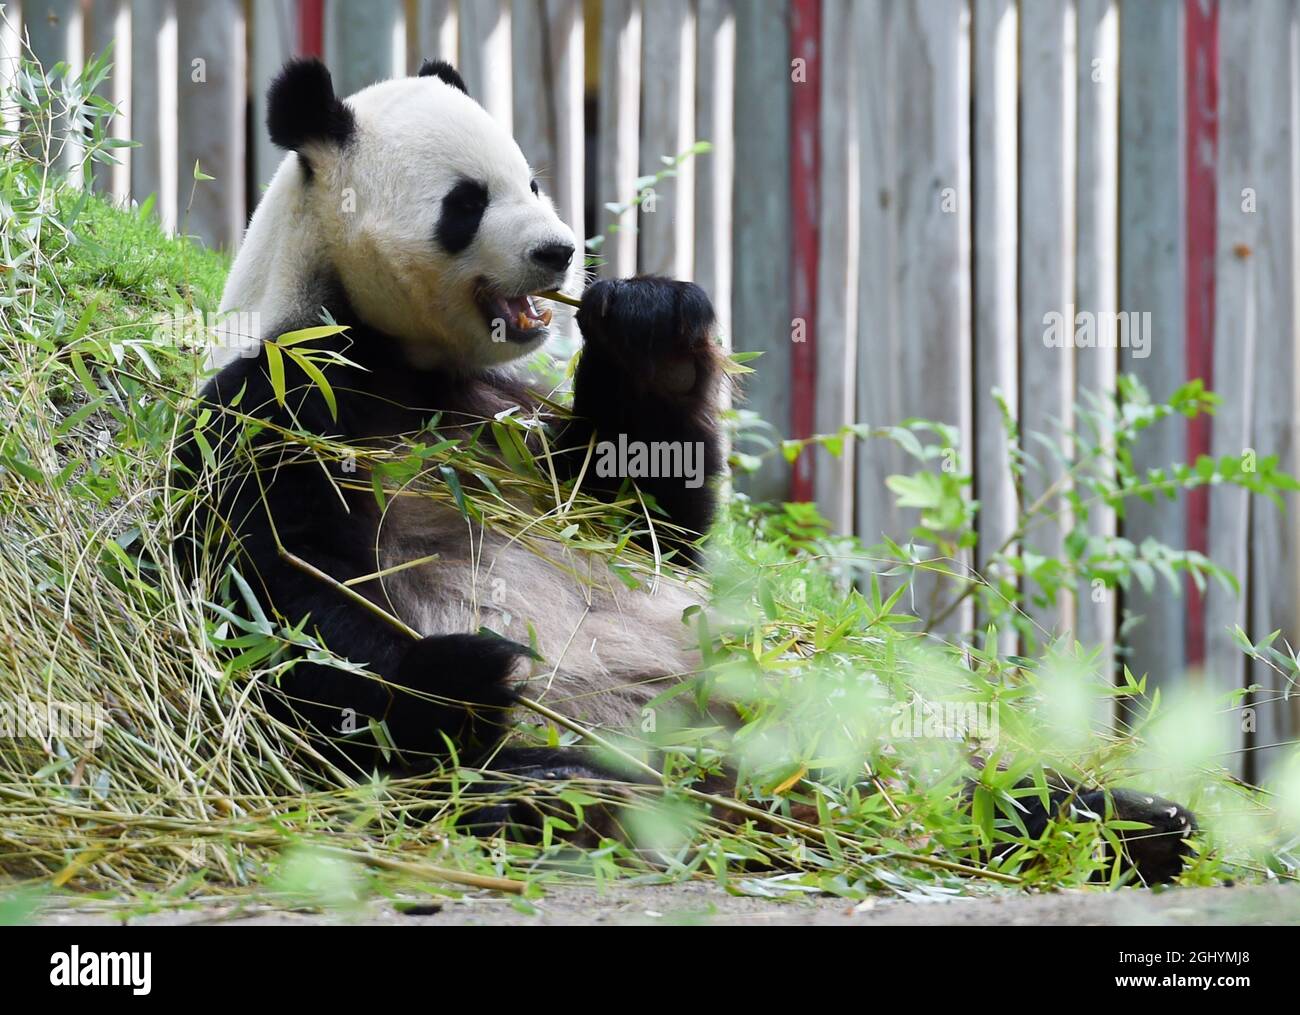 Madrid. 7th Sep, 2021. Photo taken on Sept. 7, 2021 shows a giant panda in  Zoo Aquarium in Madrid, Spain. Two giant panda cubs born in the Madrid Zoo  Aquarium on Monday